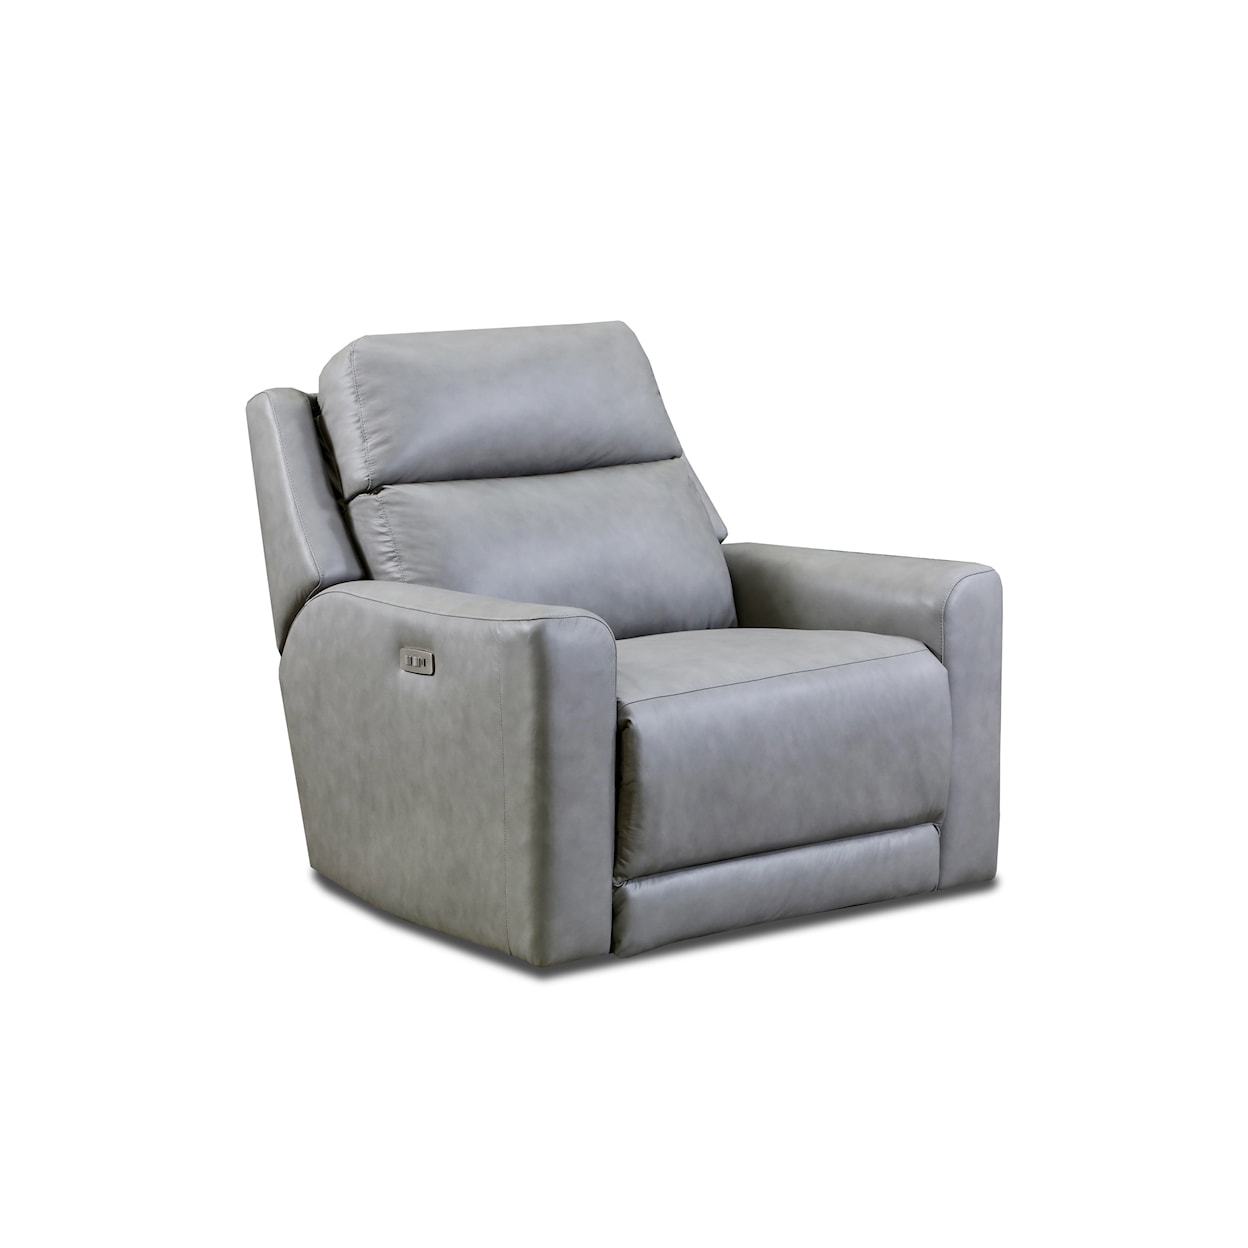 Southern Motion Social Club Power Hdrst Chair & 1/2 Recliner